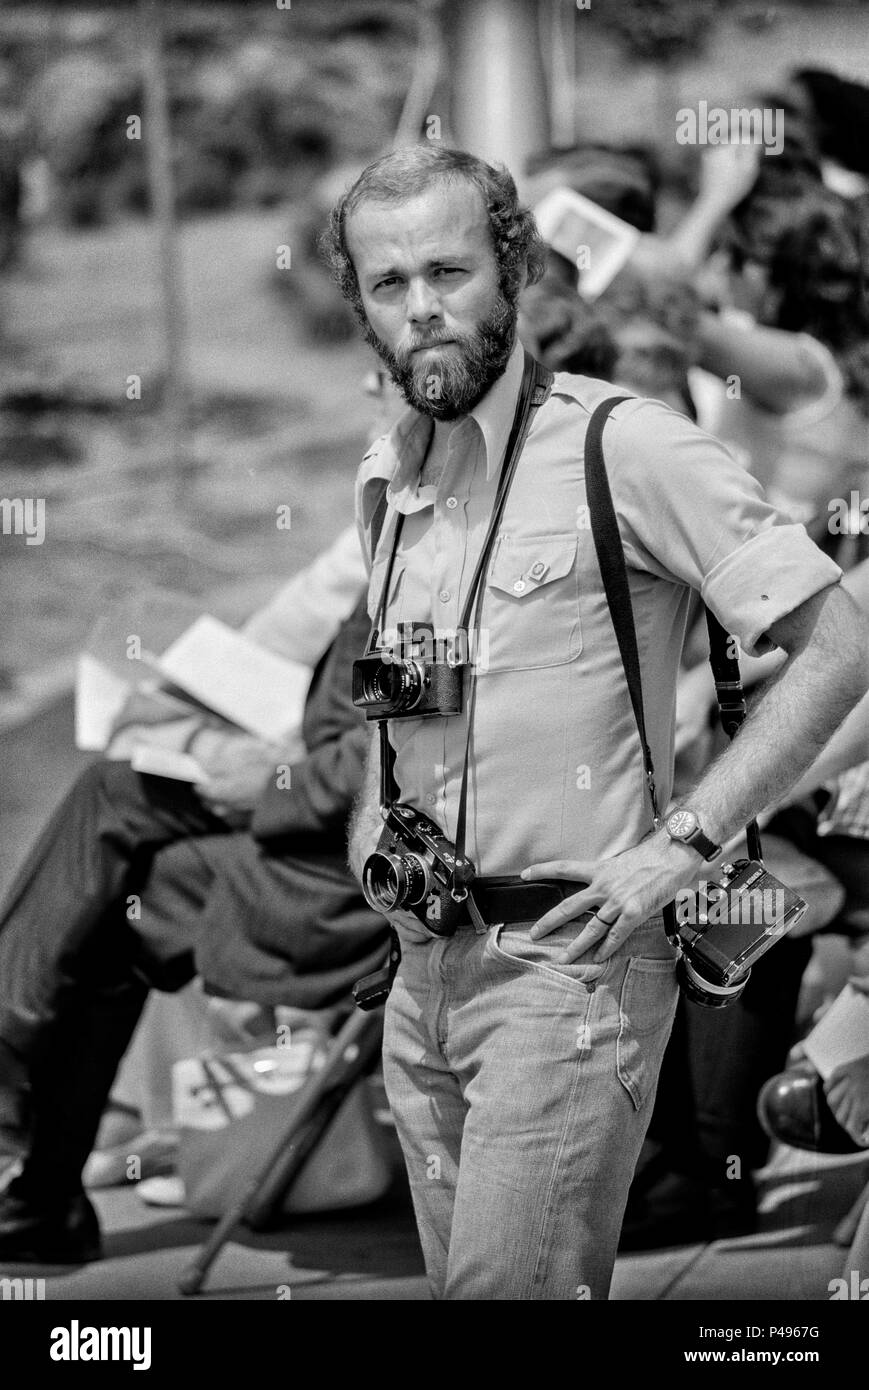 FORT SMITH, AR, USA - AUGUST 10, 1975 -- Pulitzer Prize photojournalist David Hume Kennerly prepares to cover a speech by President Gerald Ford at the new Vietnamese Refugee Center at Fort Chaffee, AR. Kennerly, who won a Pulitzer Prize for his photo coverage of the Vietnam War was made official White House photographer by Ford. Stock Photo